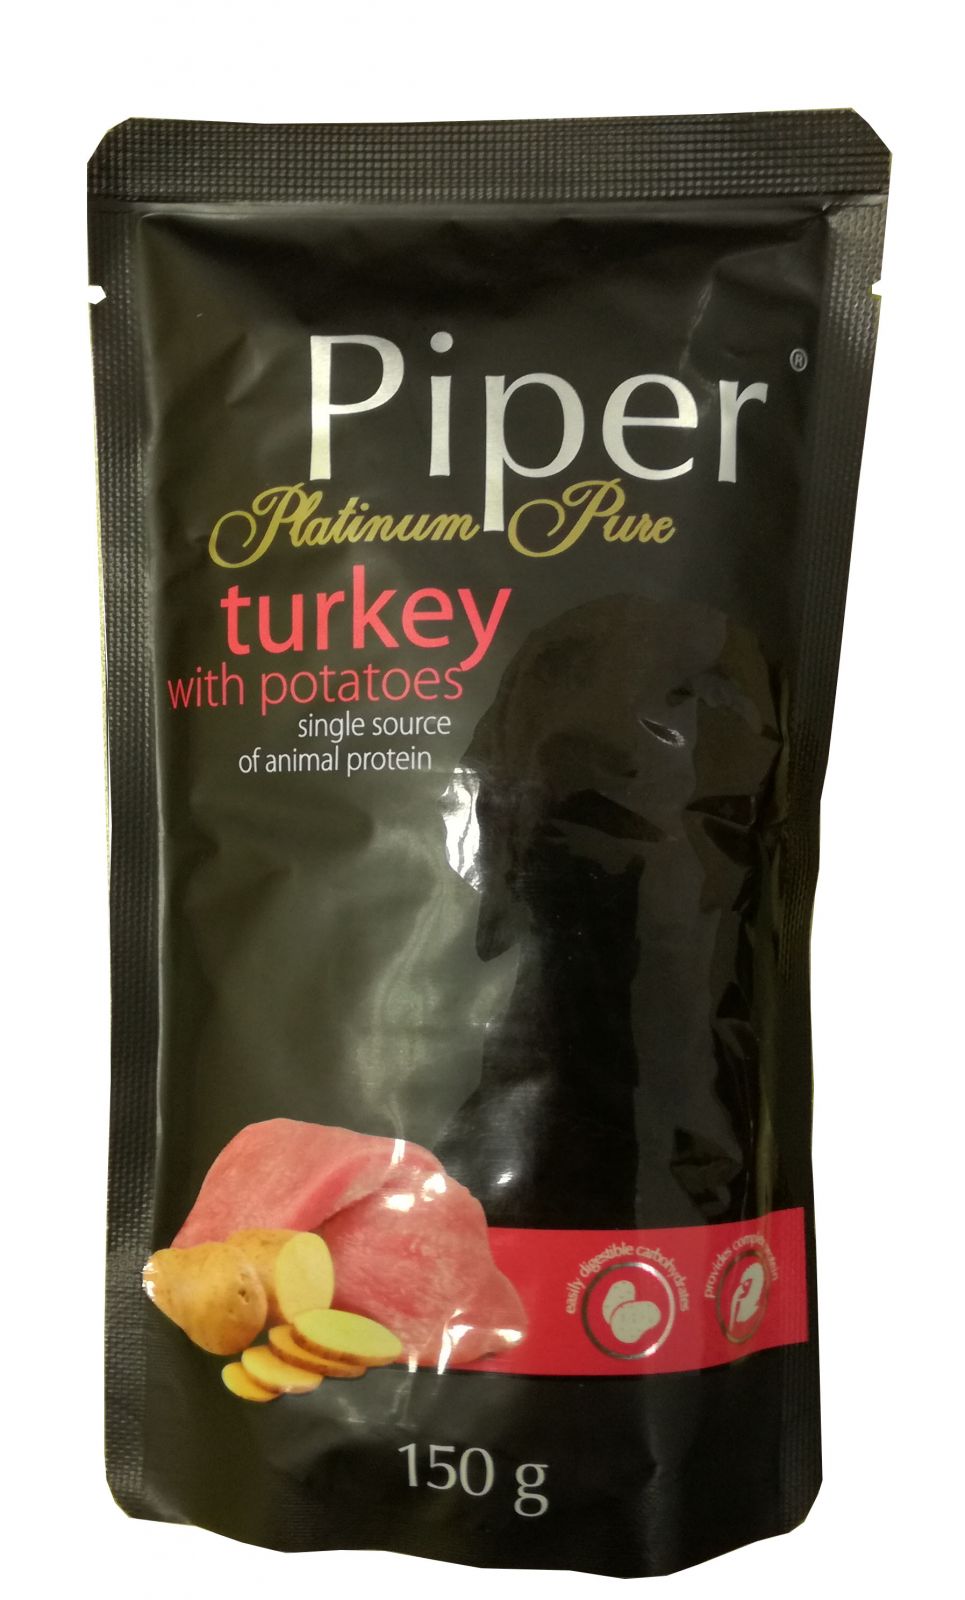 Piper Platinum Pure - Turkey with Potatoes 150g